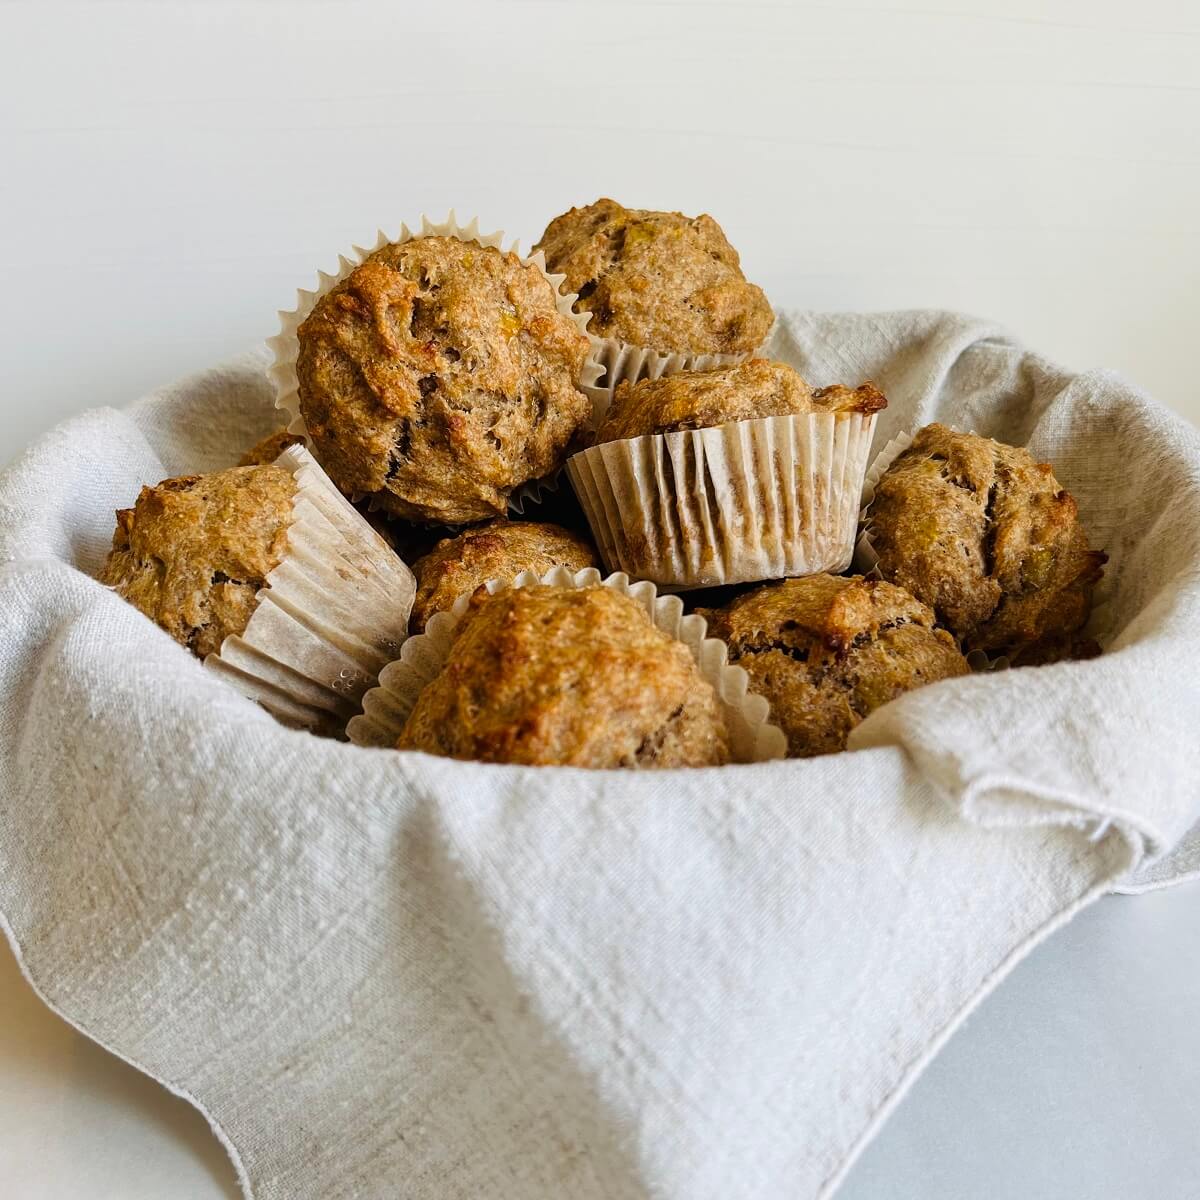 Banana muffins piled in a basket lined with a linen napkin.